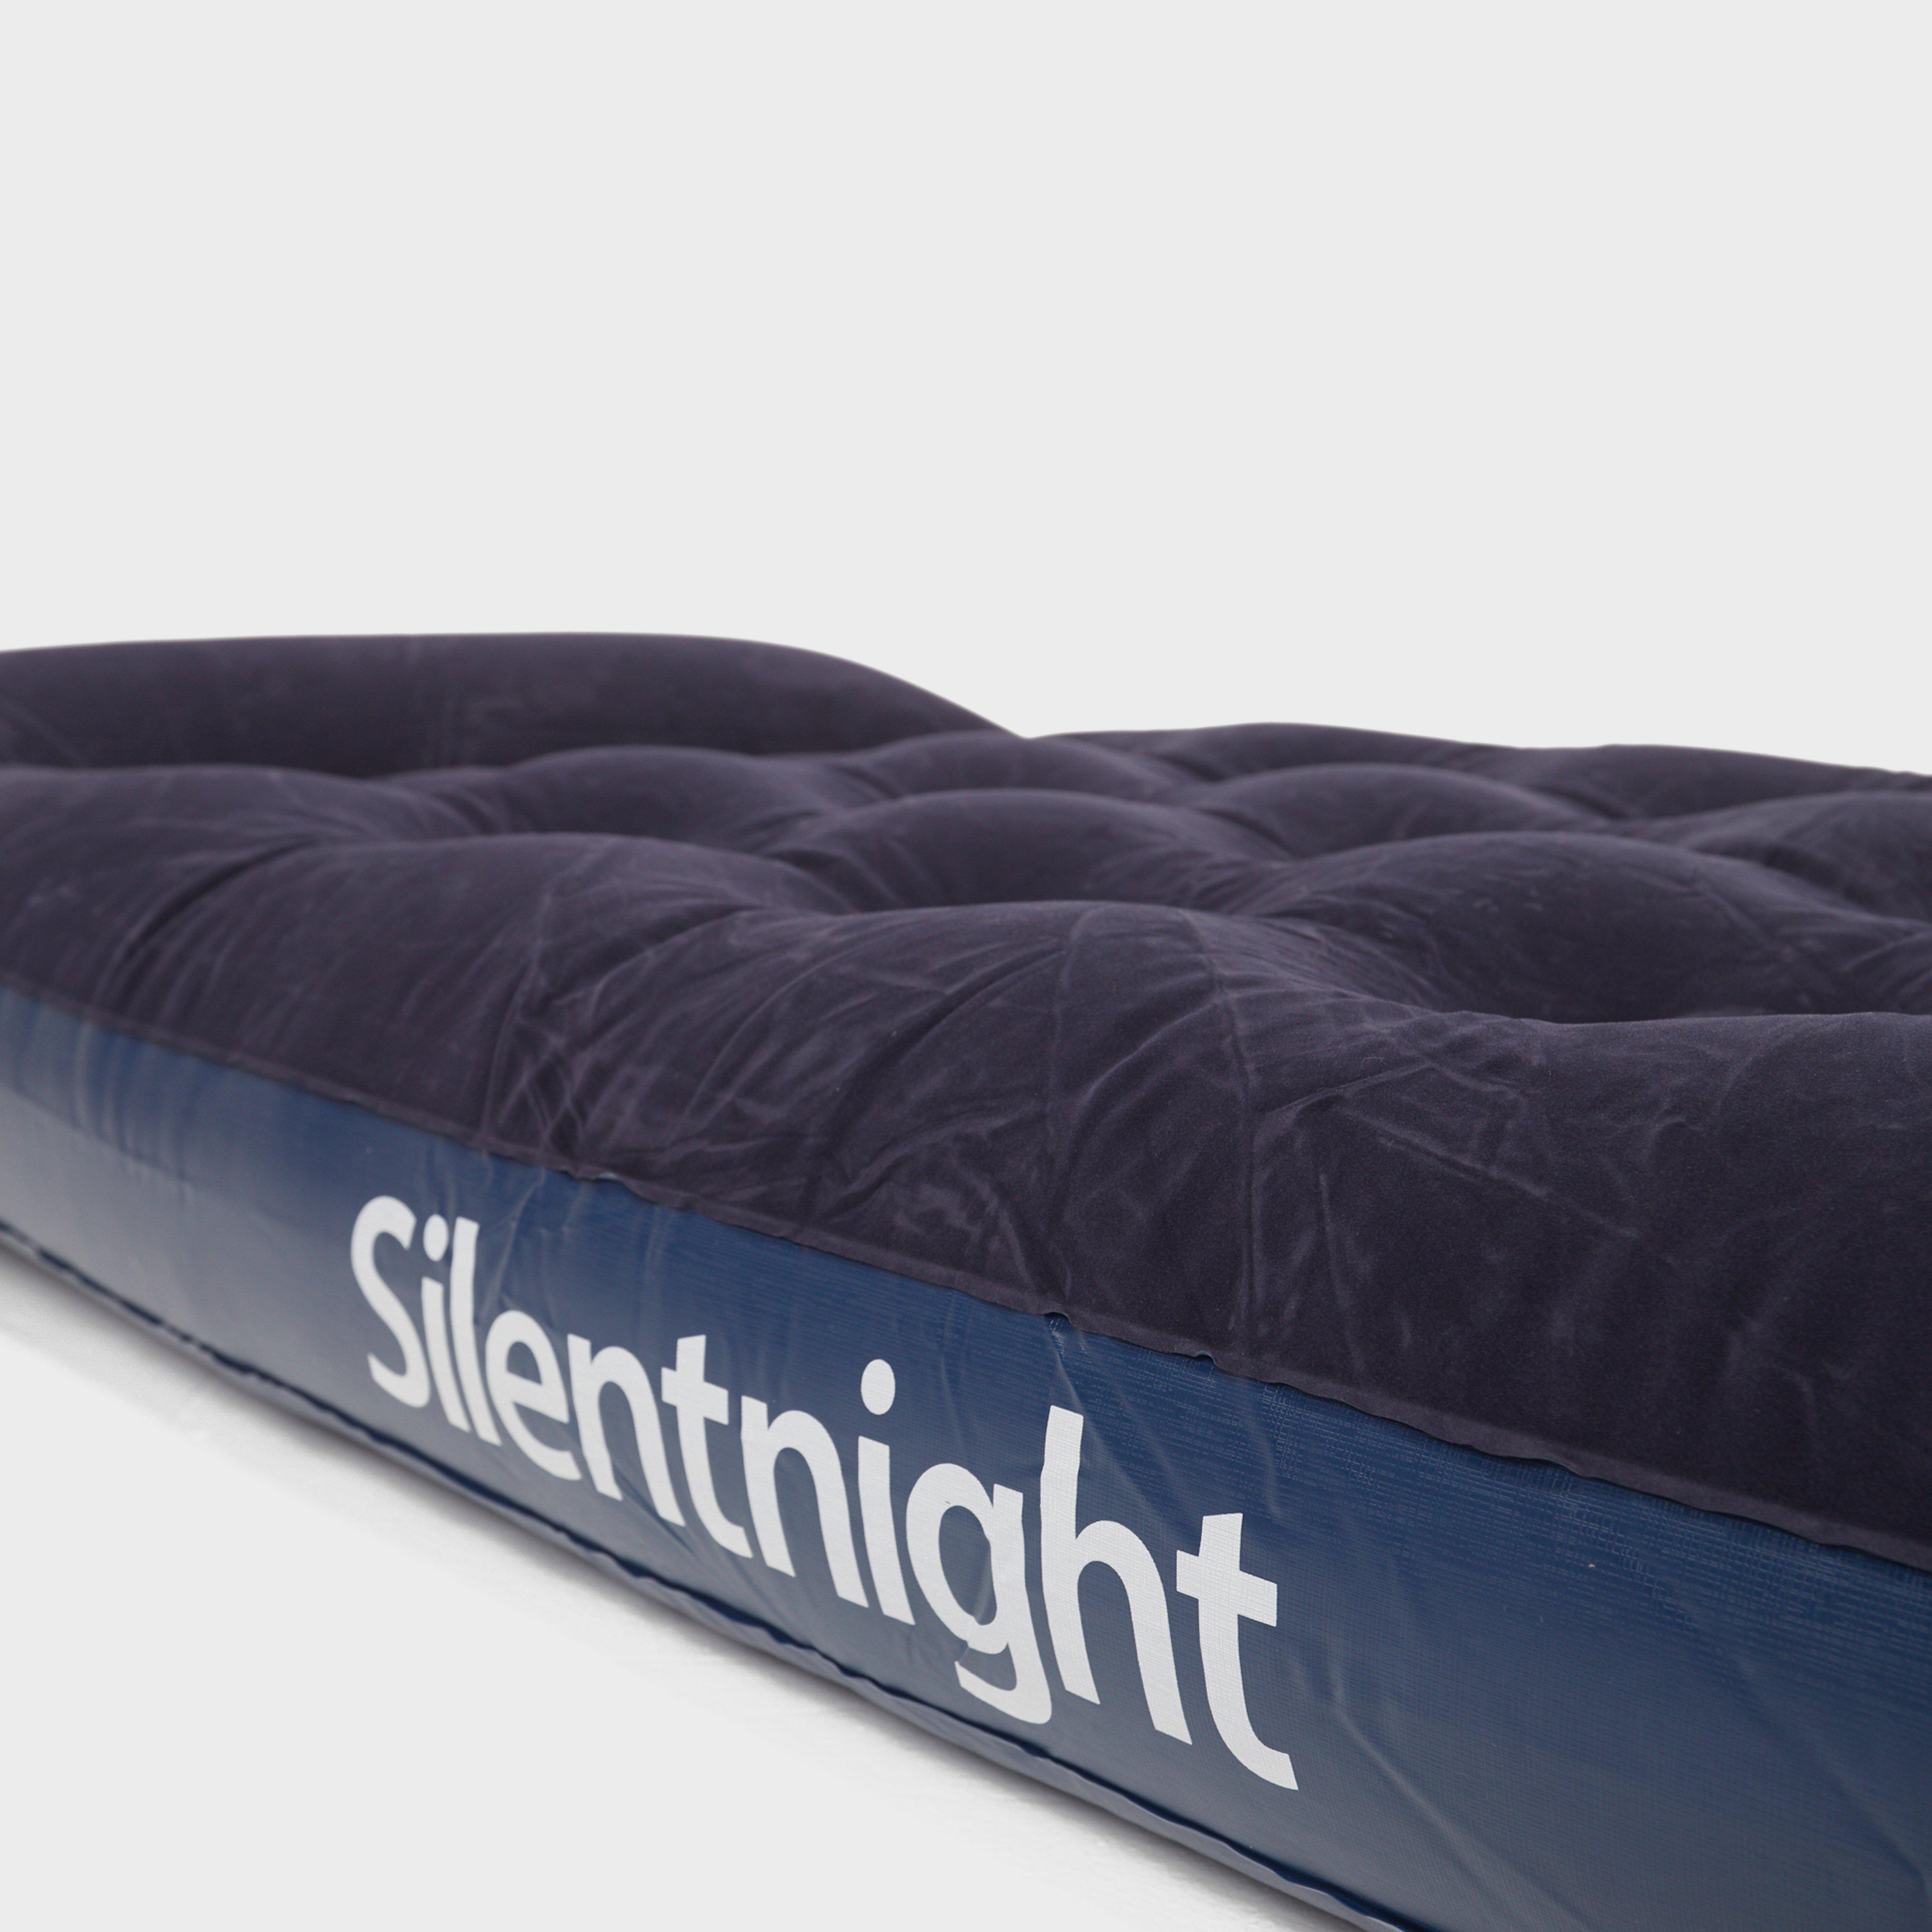 Silentnight Single Flock Pump Airbed Review